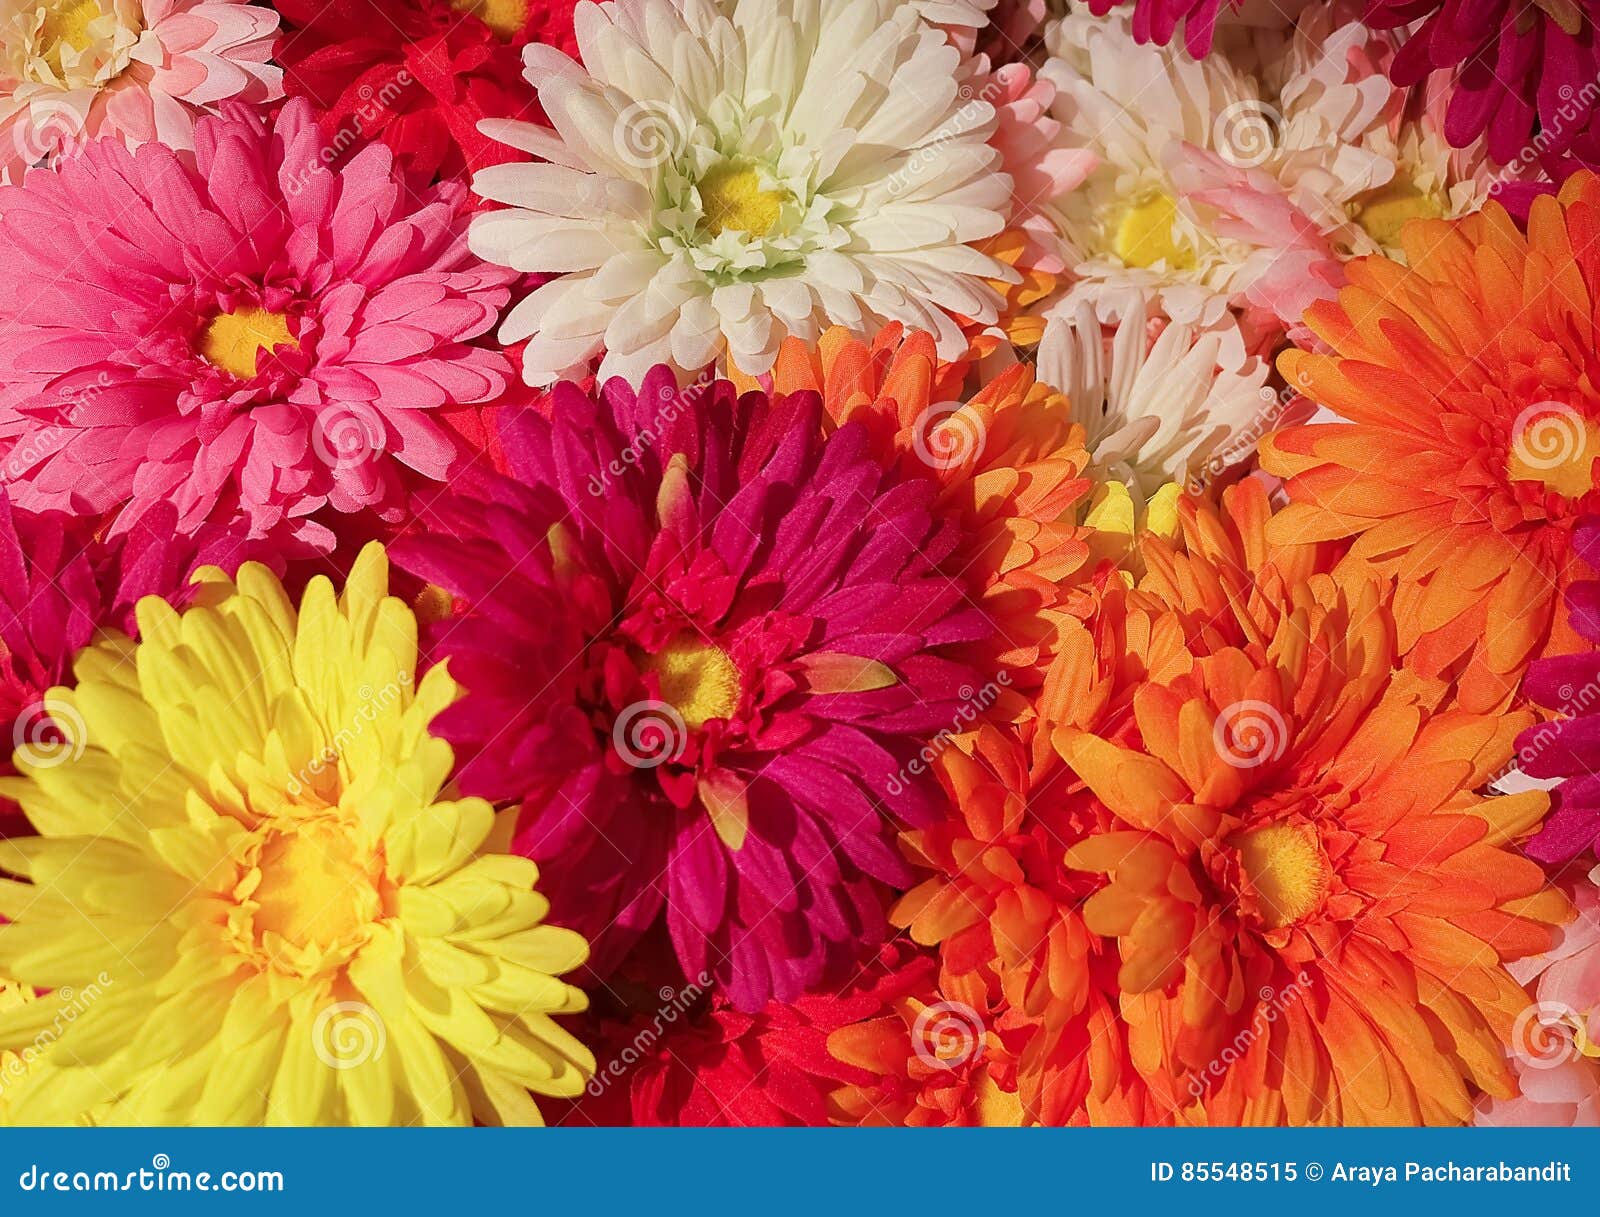 Close Up of Colorful Artificial Daisy Flowers Stock Image - Image of flora,  decoration: 85548515